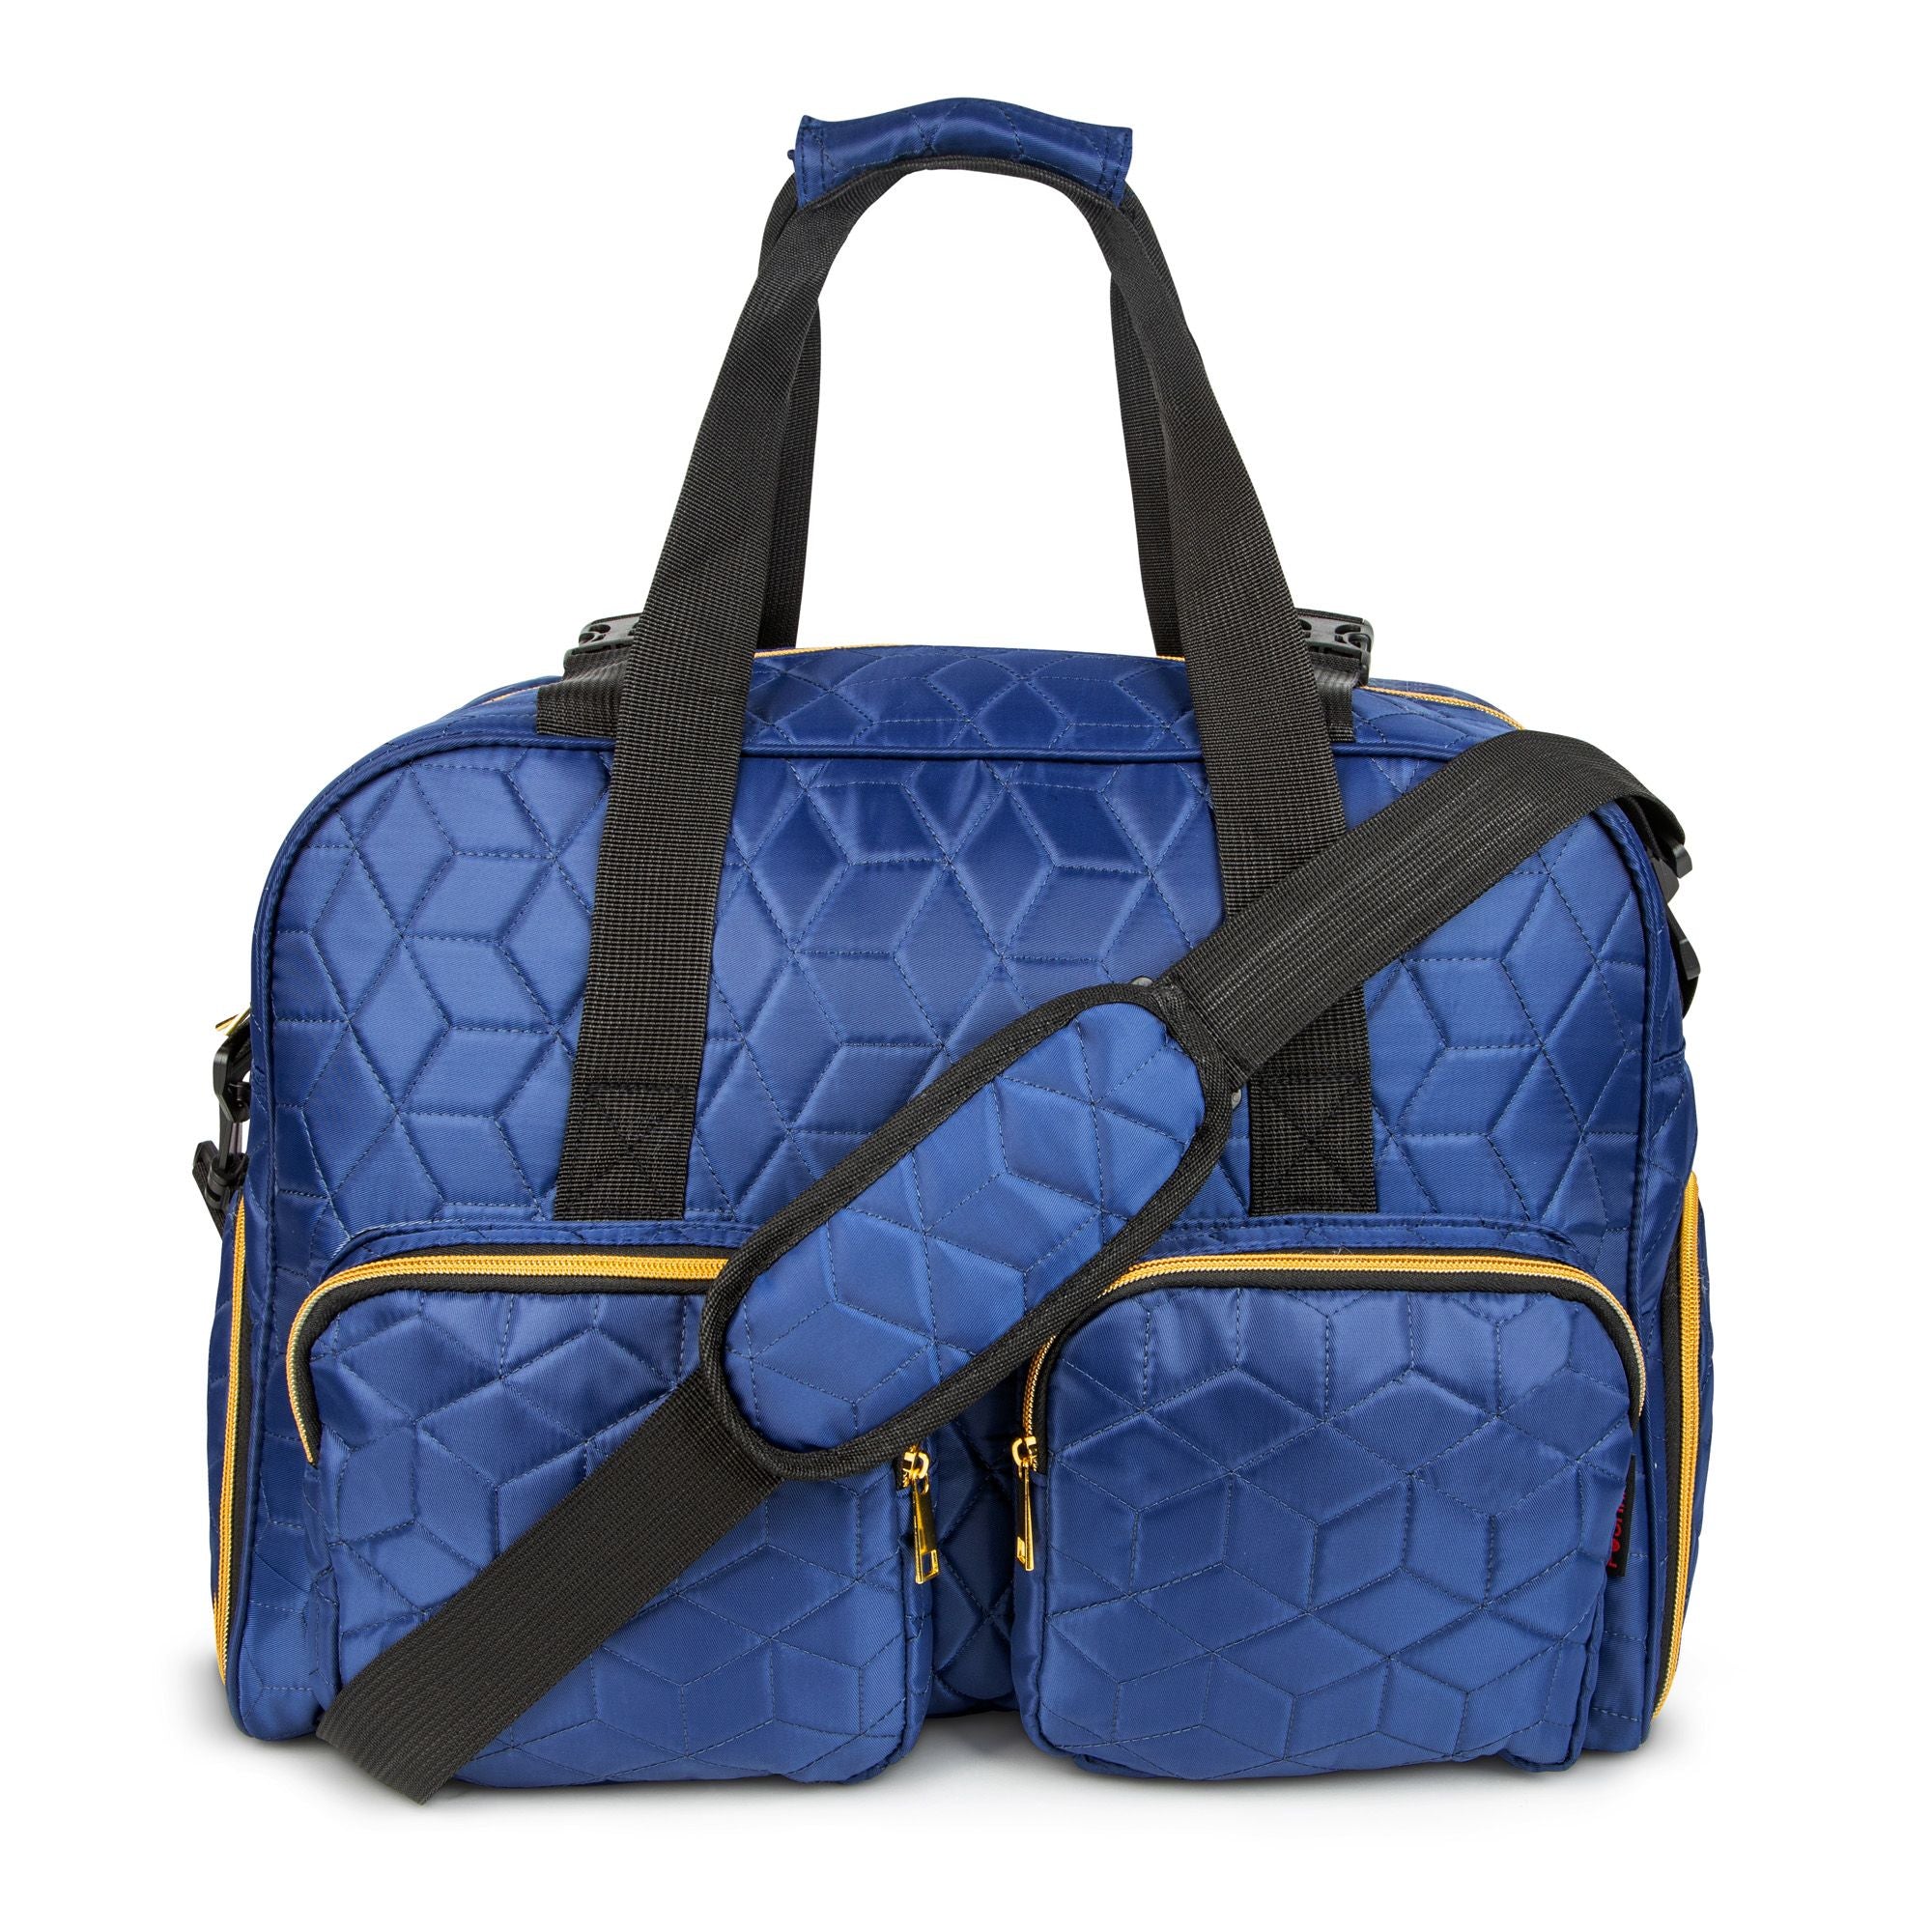 N. Gil Owl Chevron Large Quilted Duffel Bag - Grey with Blue Trim